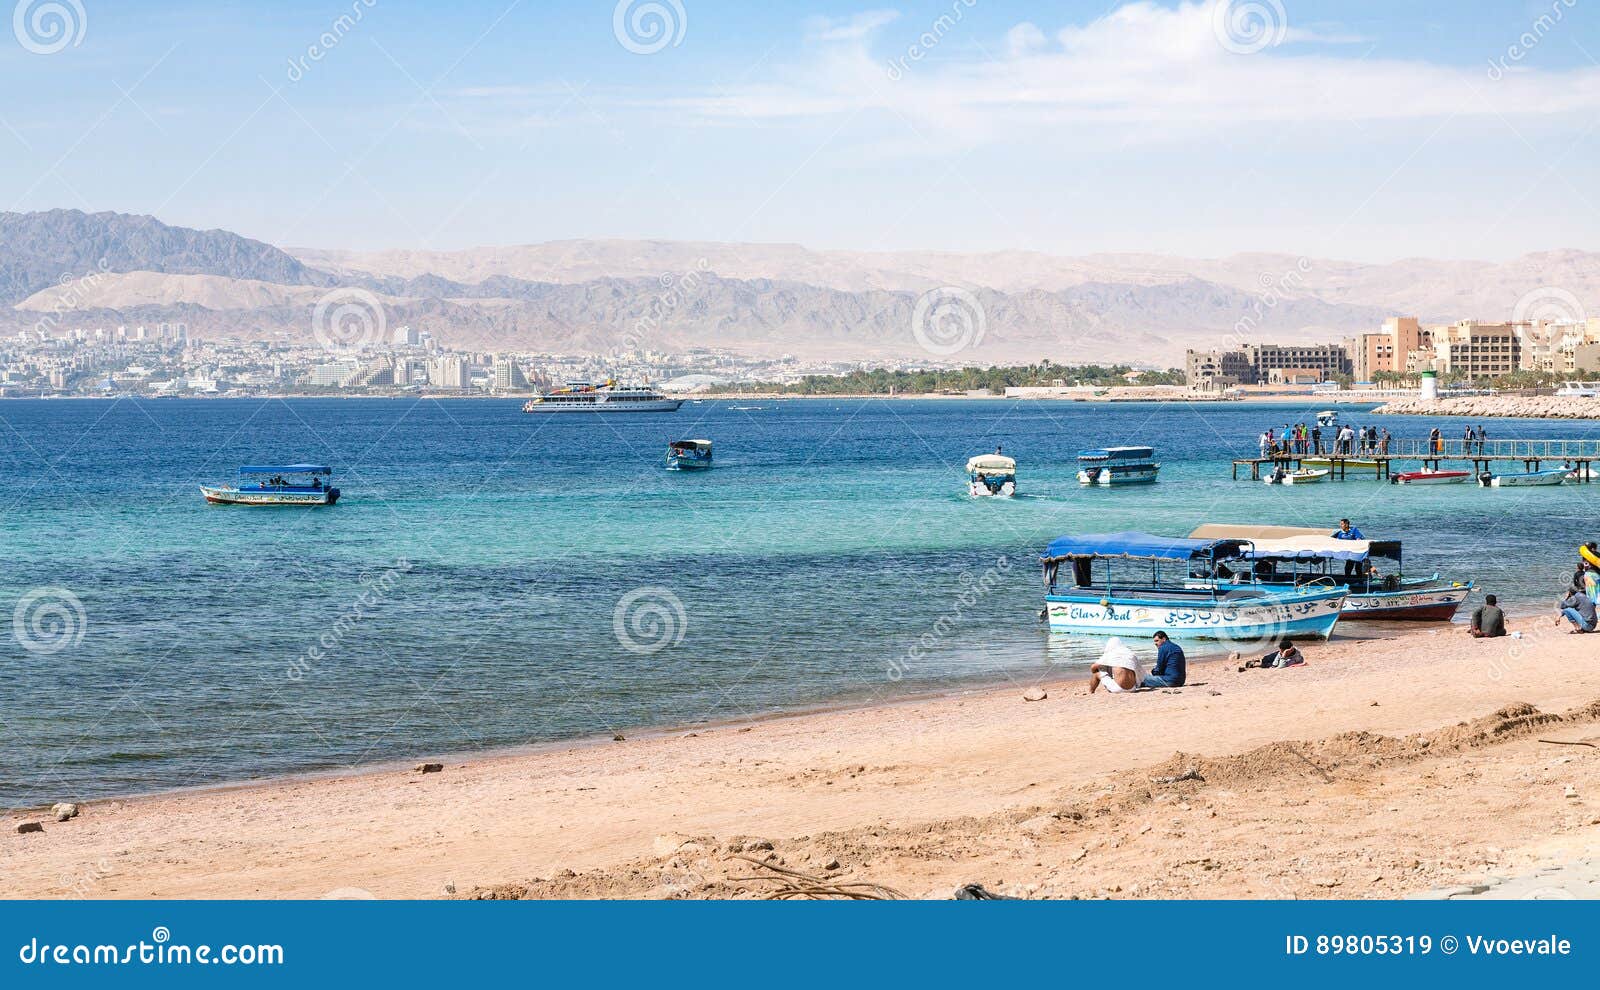 Aqaba City Beach and View of Eilat in Background Editorial Image - Image of shore, resort: 89805319